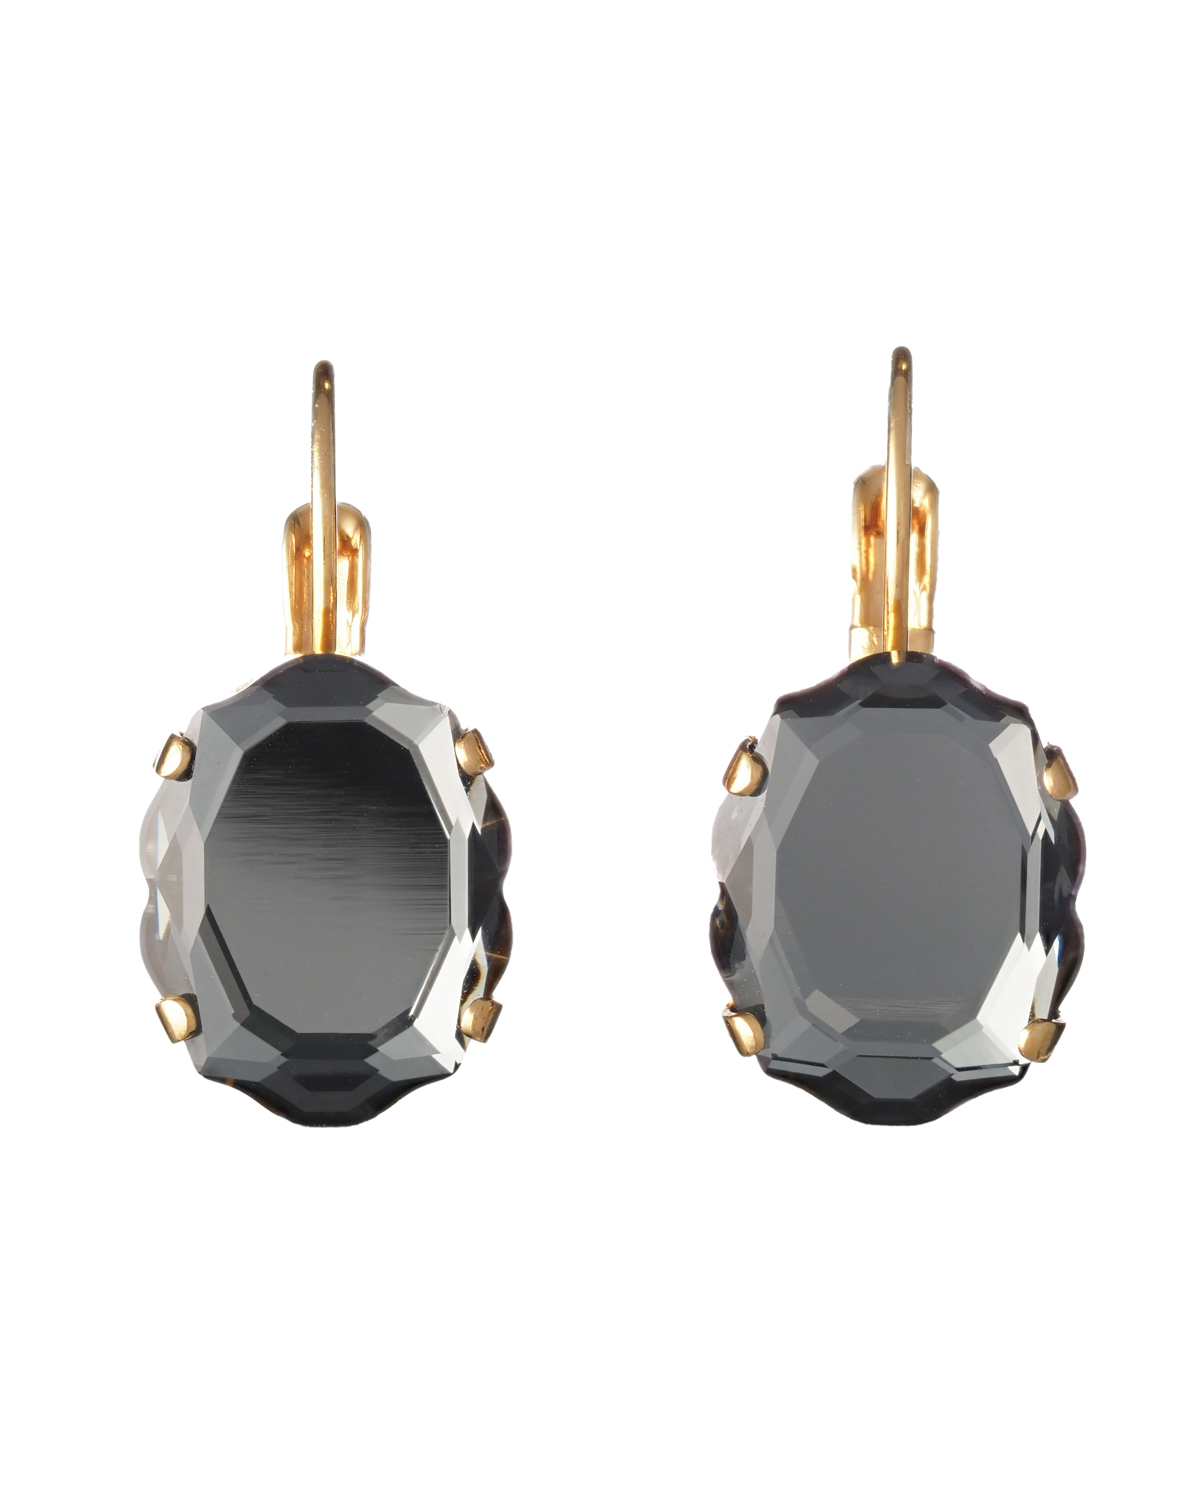 Black Baroque Mirror Earrings - Gold plated